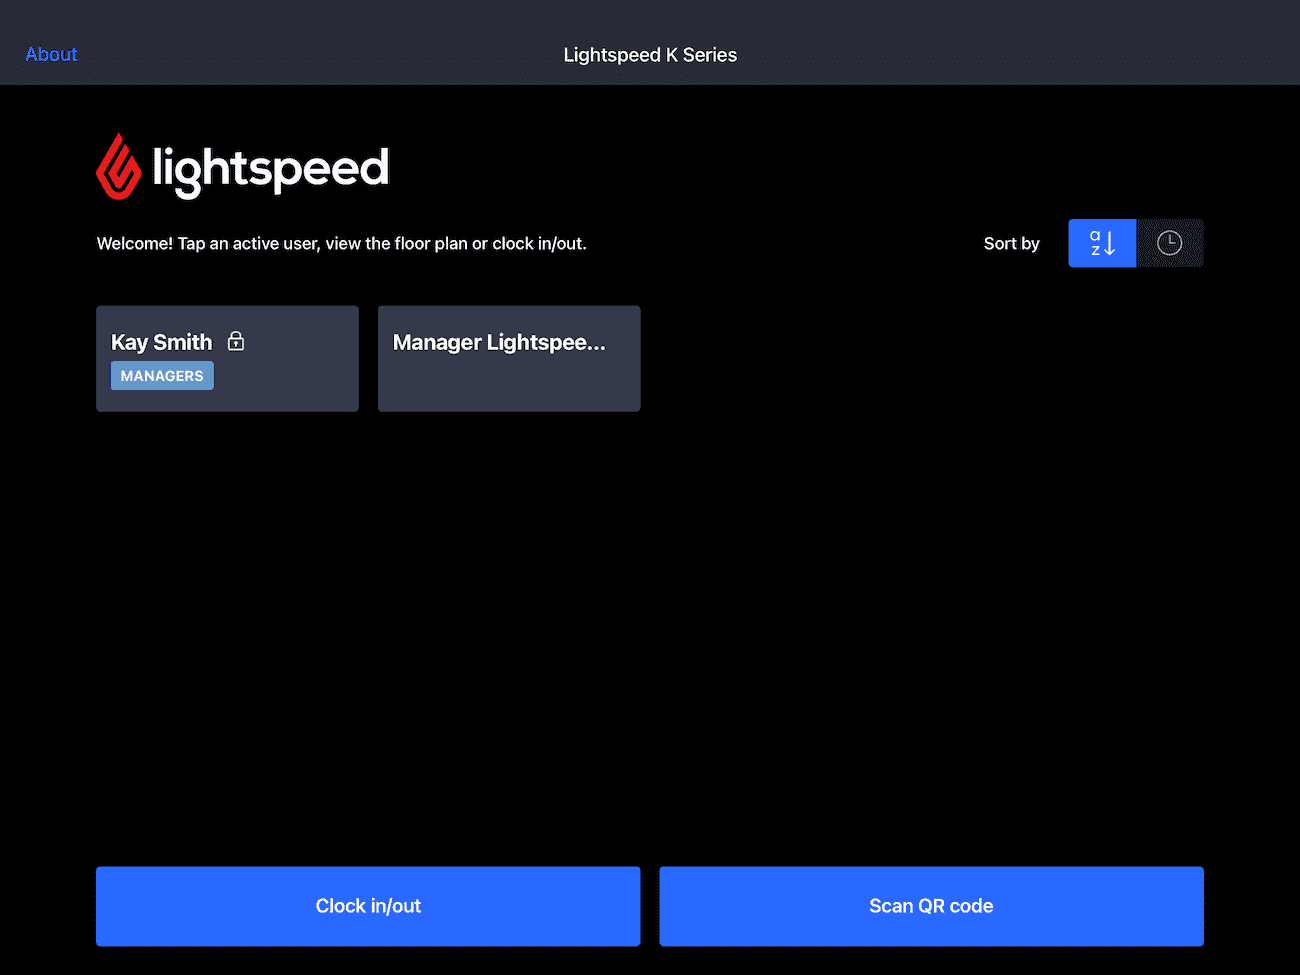 Image displays the login page for Lightspeed POS. There are two blue buttons on the bottom of the screen, one is titled 'Clock in/out' and the second is titled 'Scan QR code.'